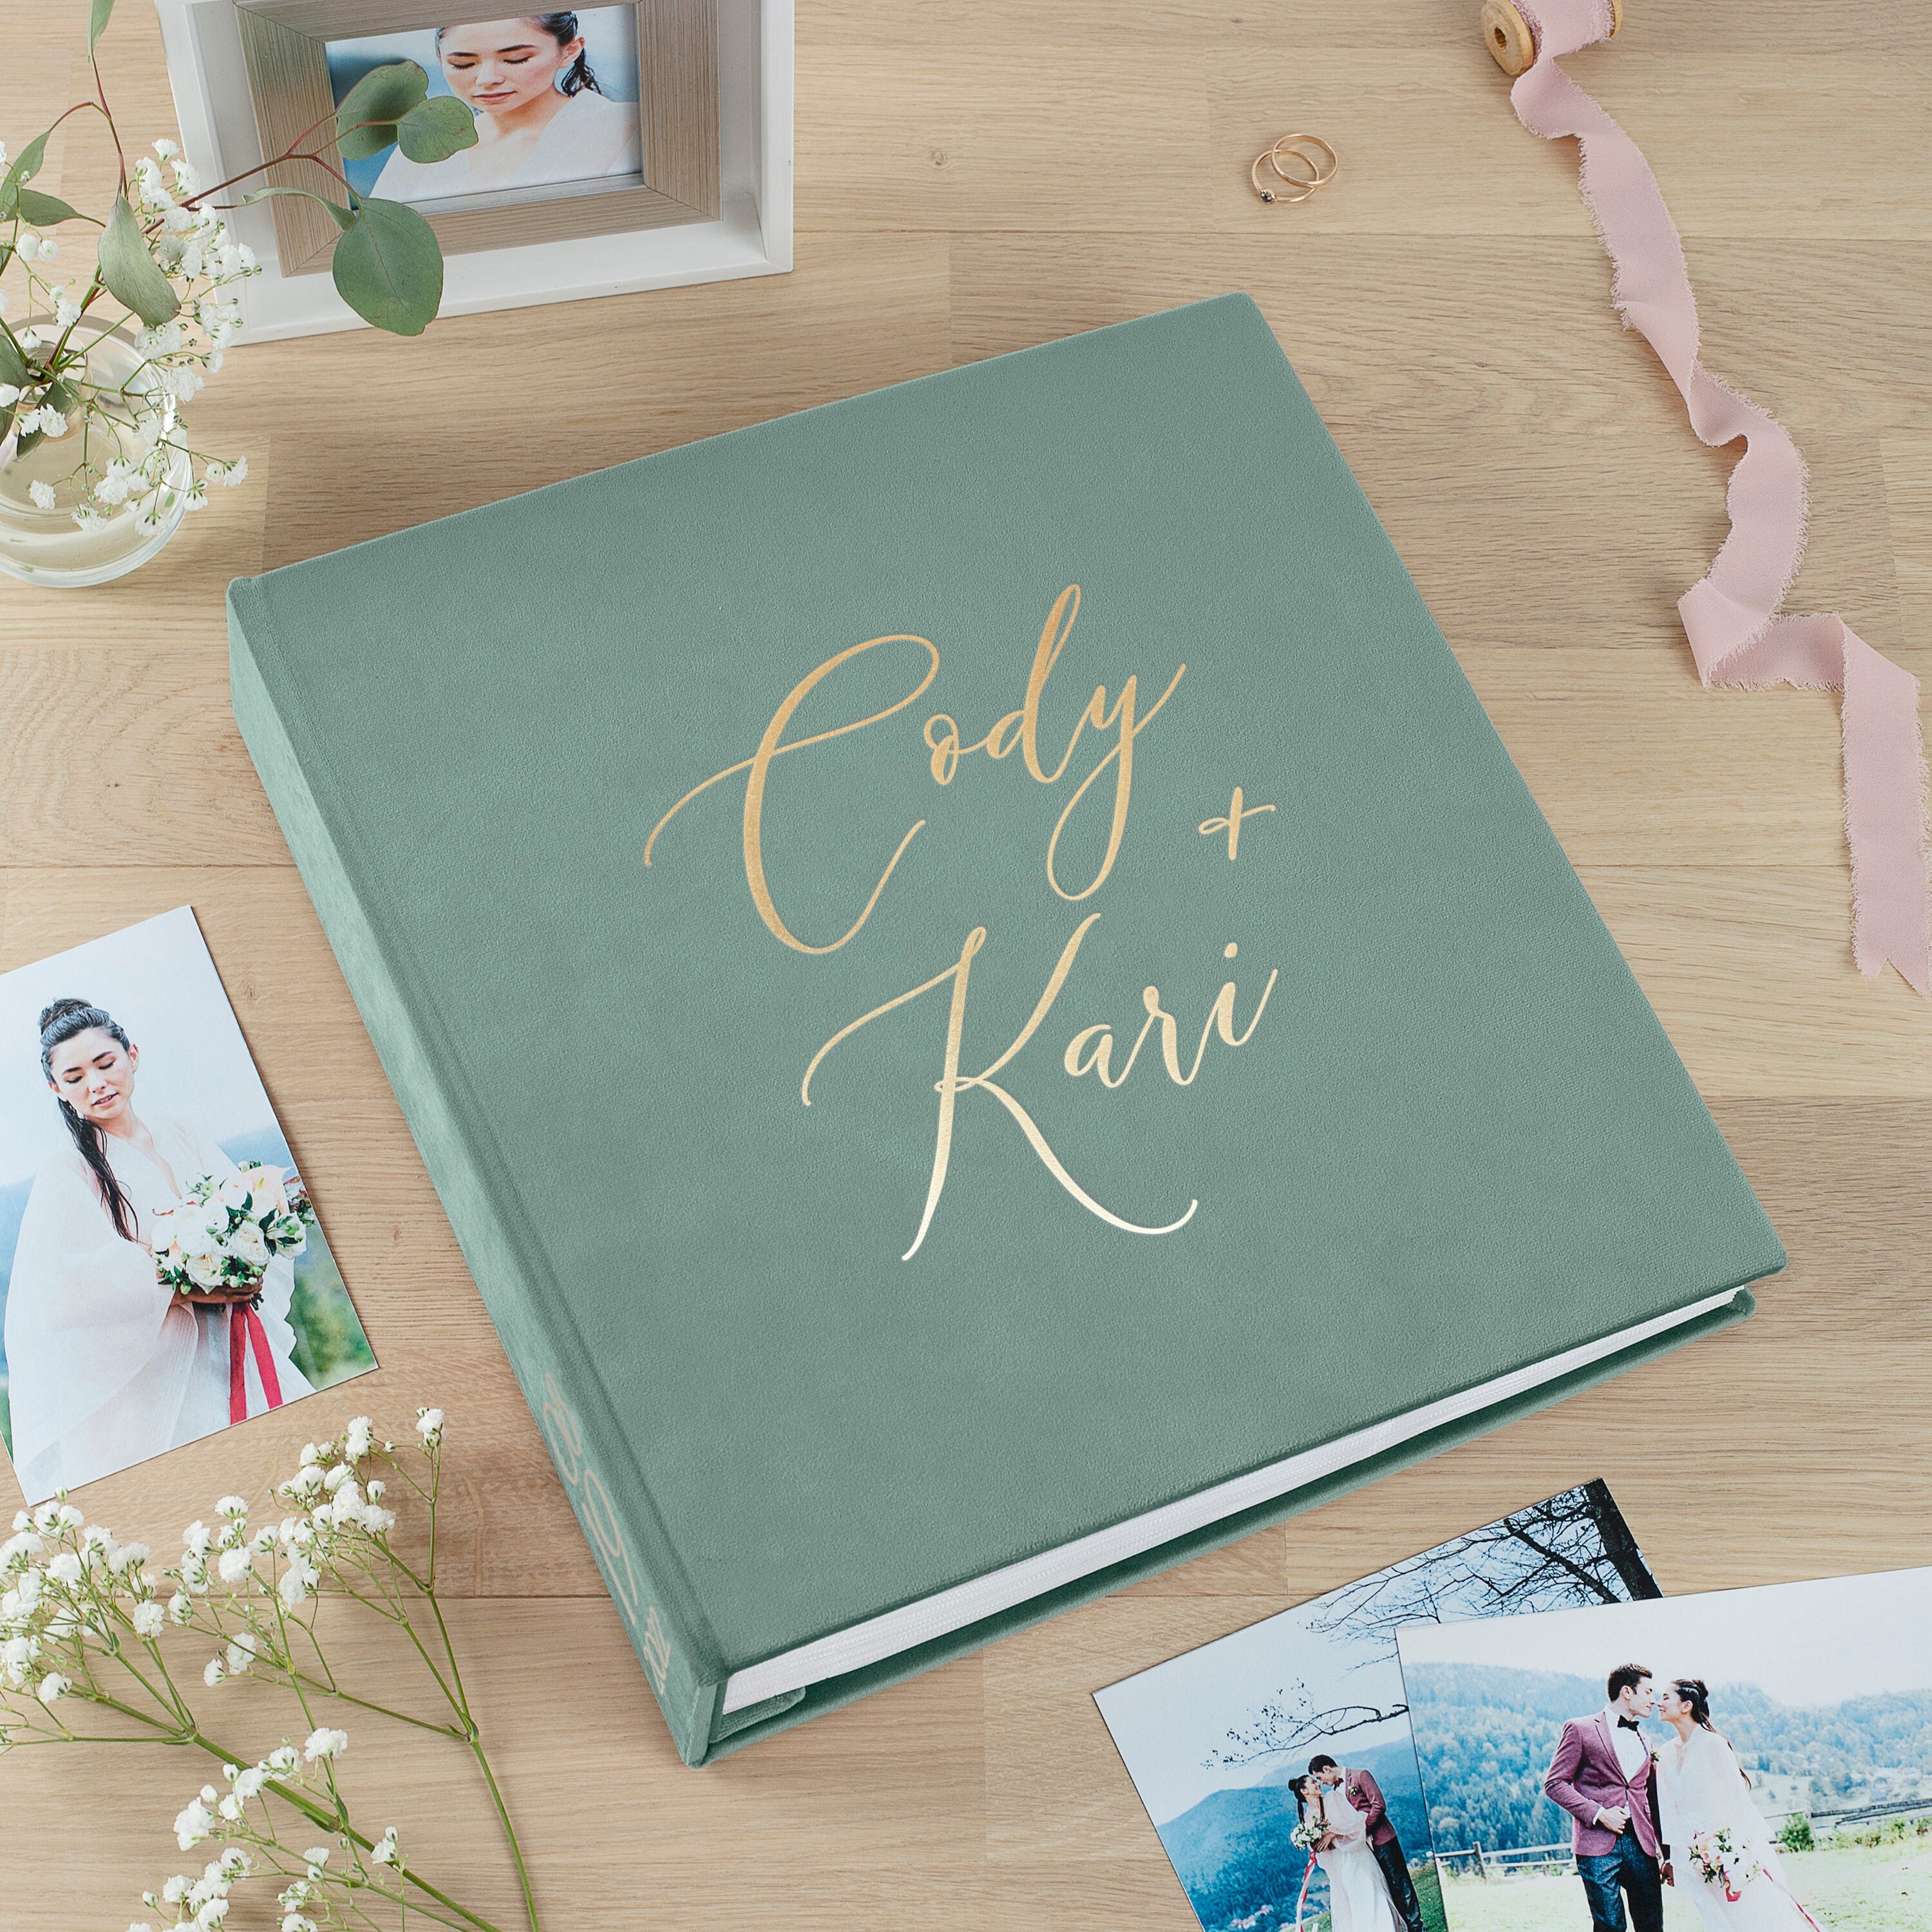 Large Photo Album for 1000 Photos, 4x6 Photo Albums with Pockets